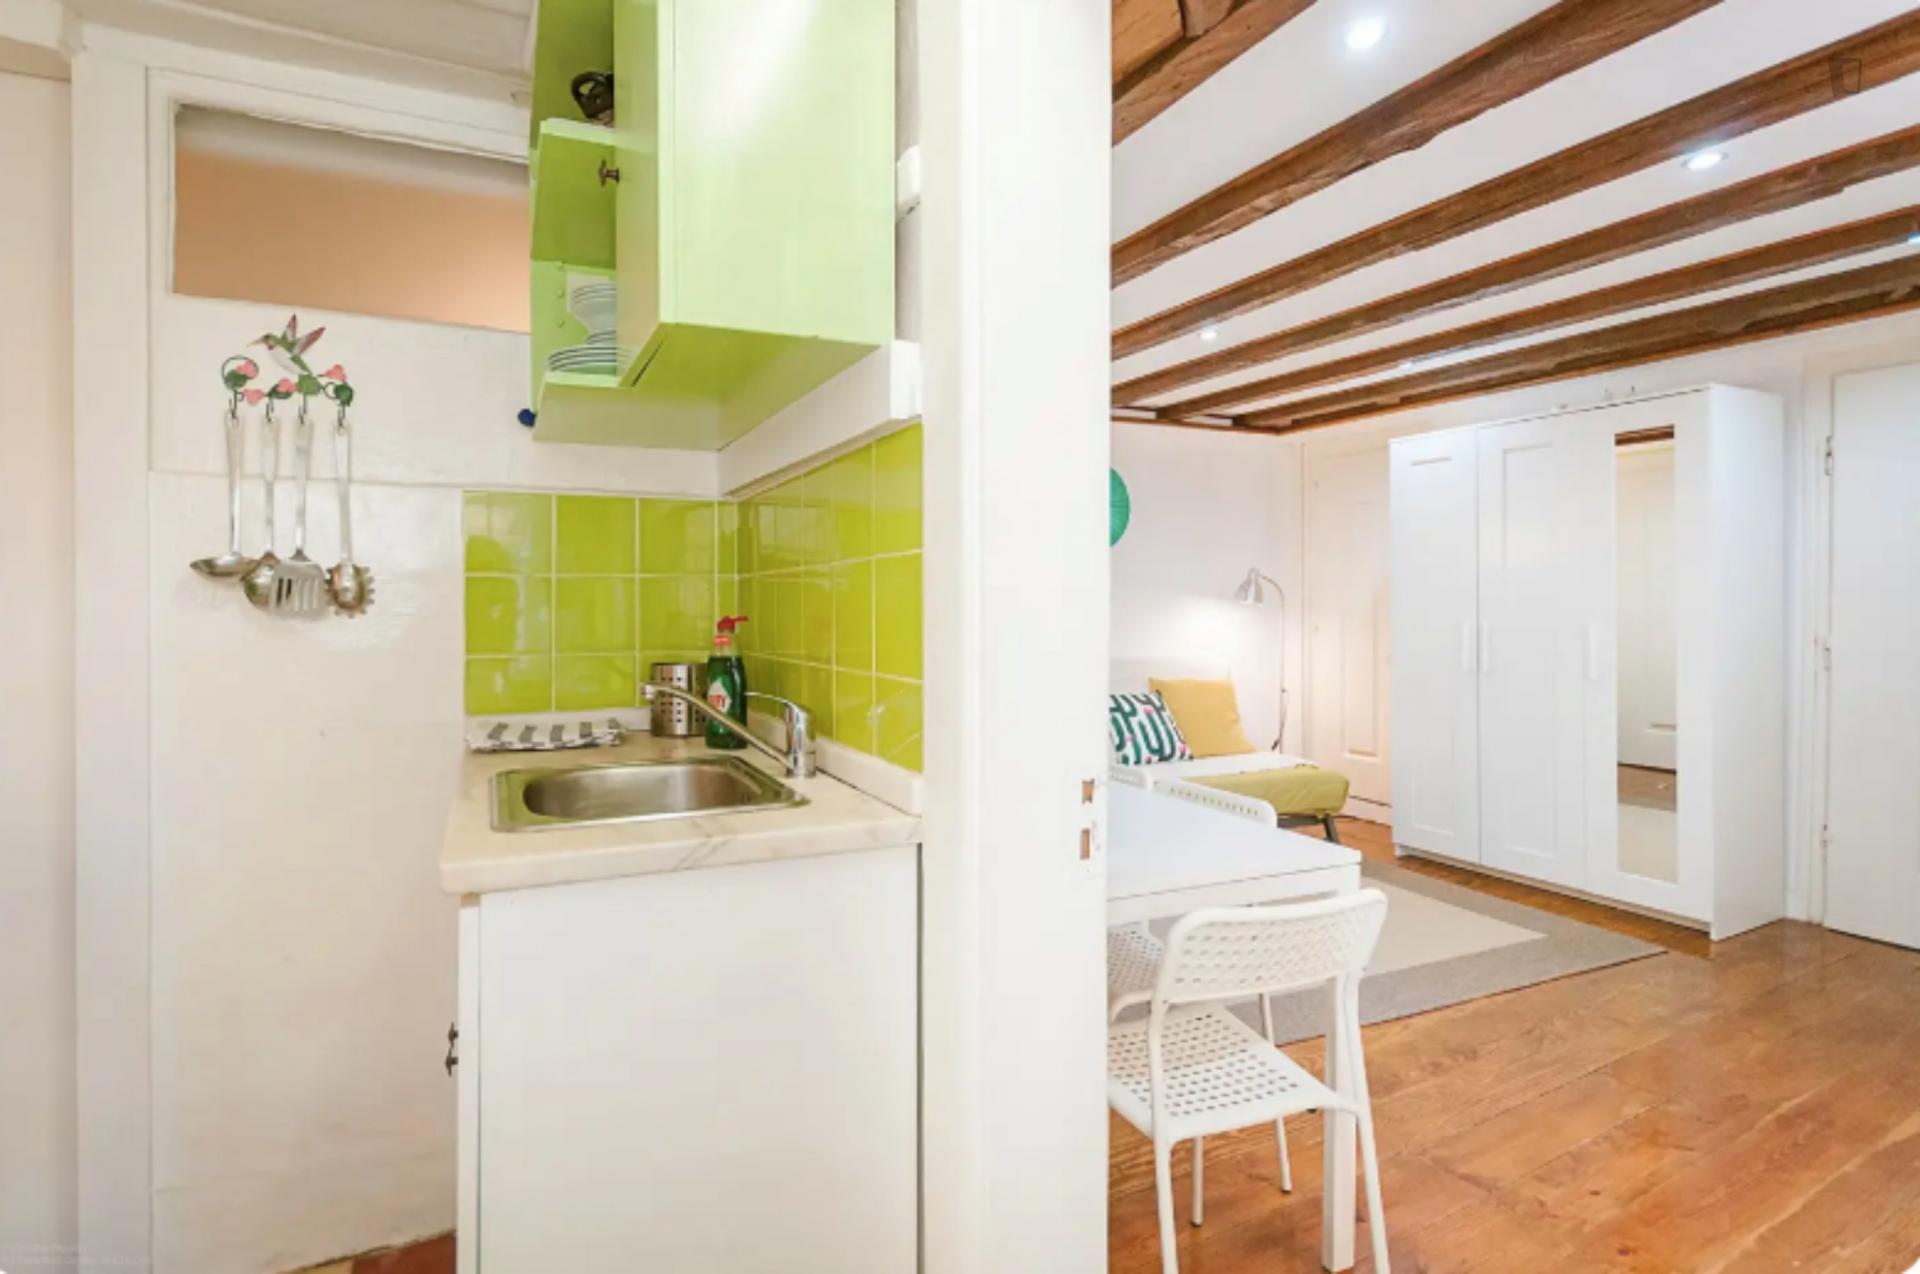 Melo- Historic 1 bedroom apartment in Lisbon